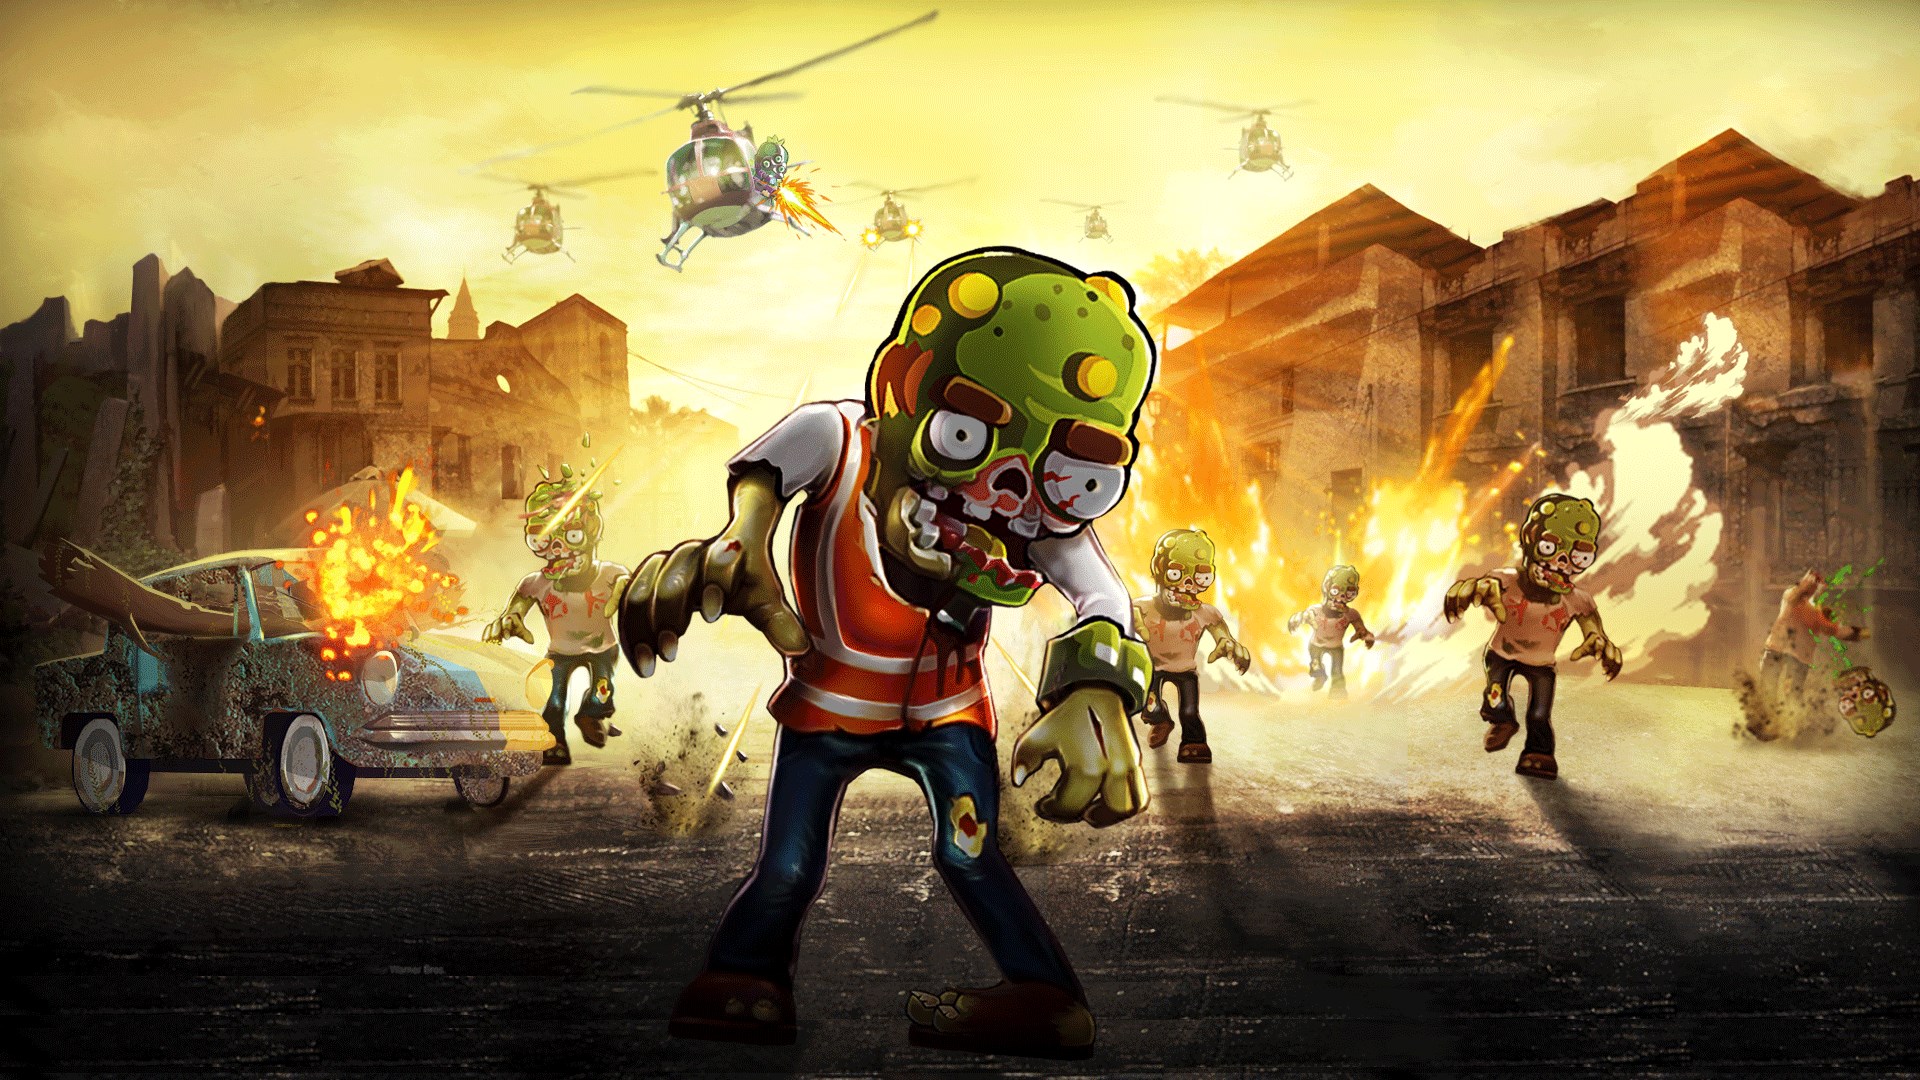 Plants vs. Zombies Download - Tower defense game